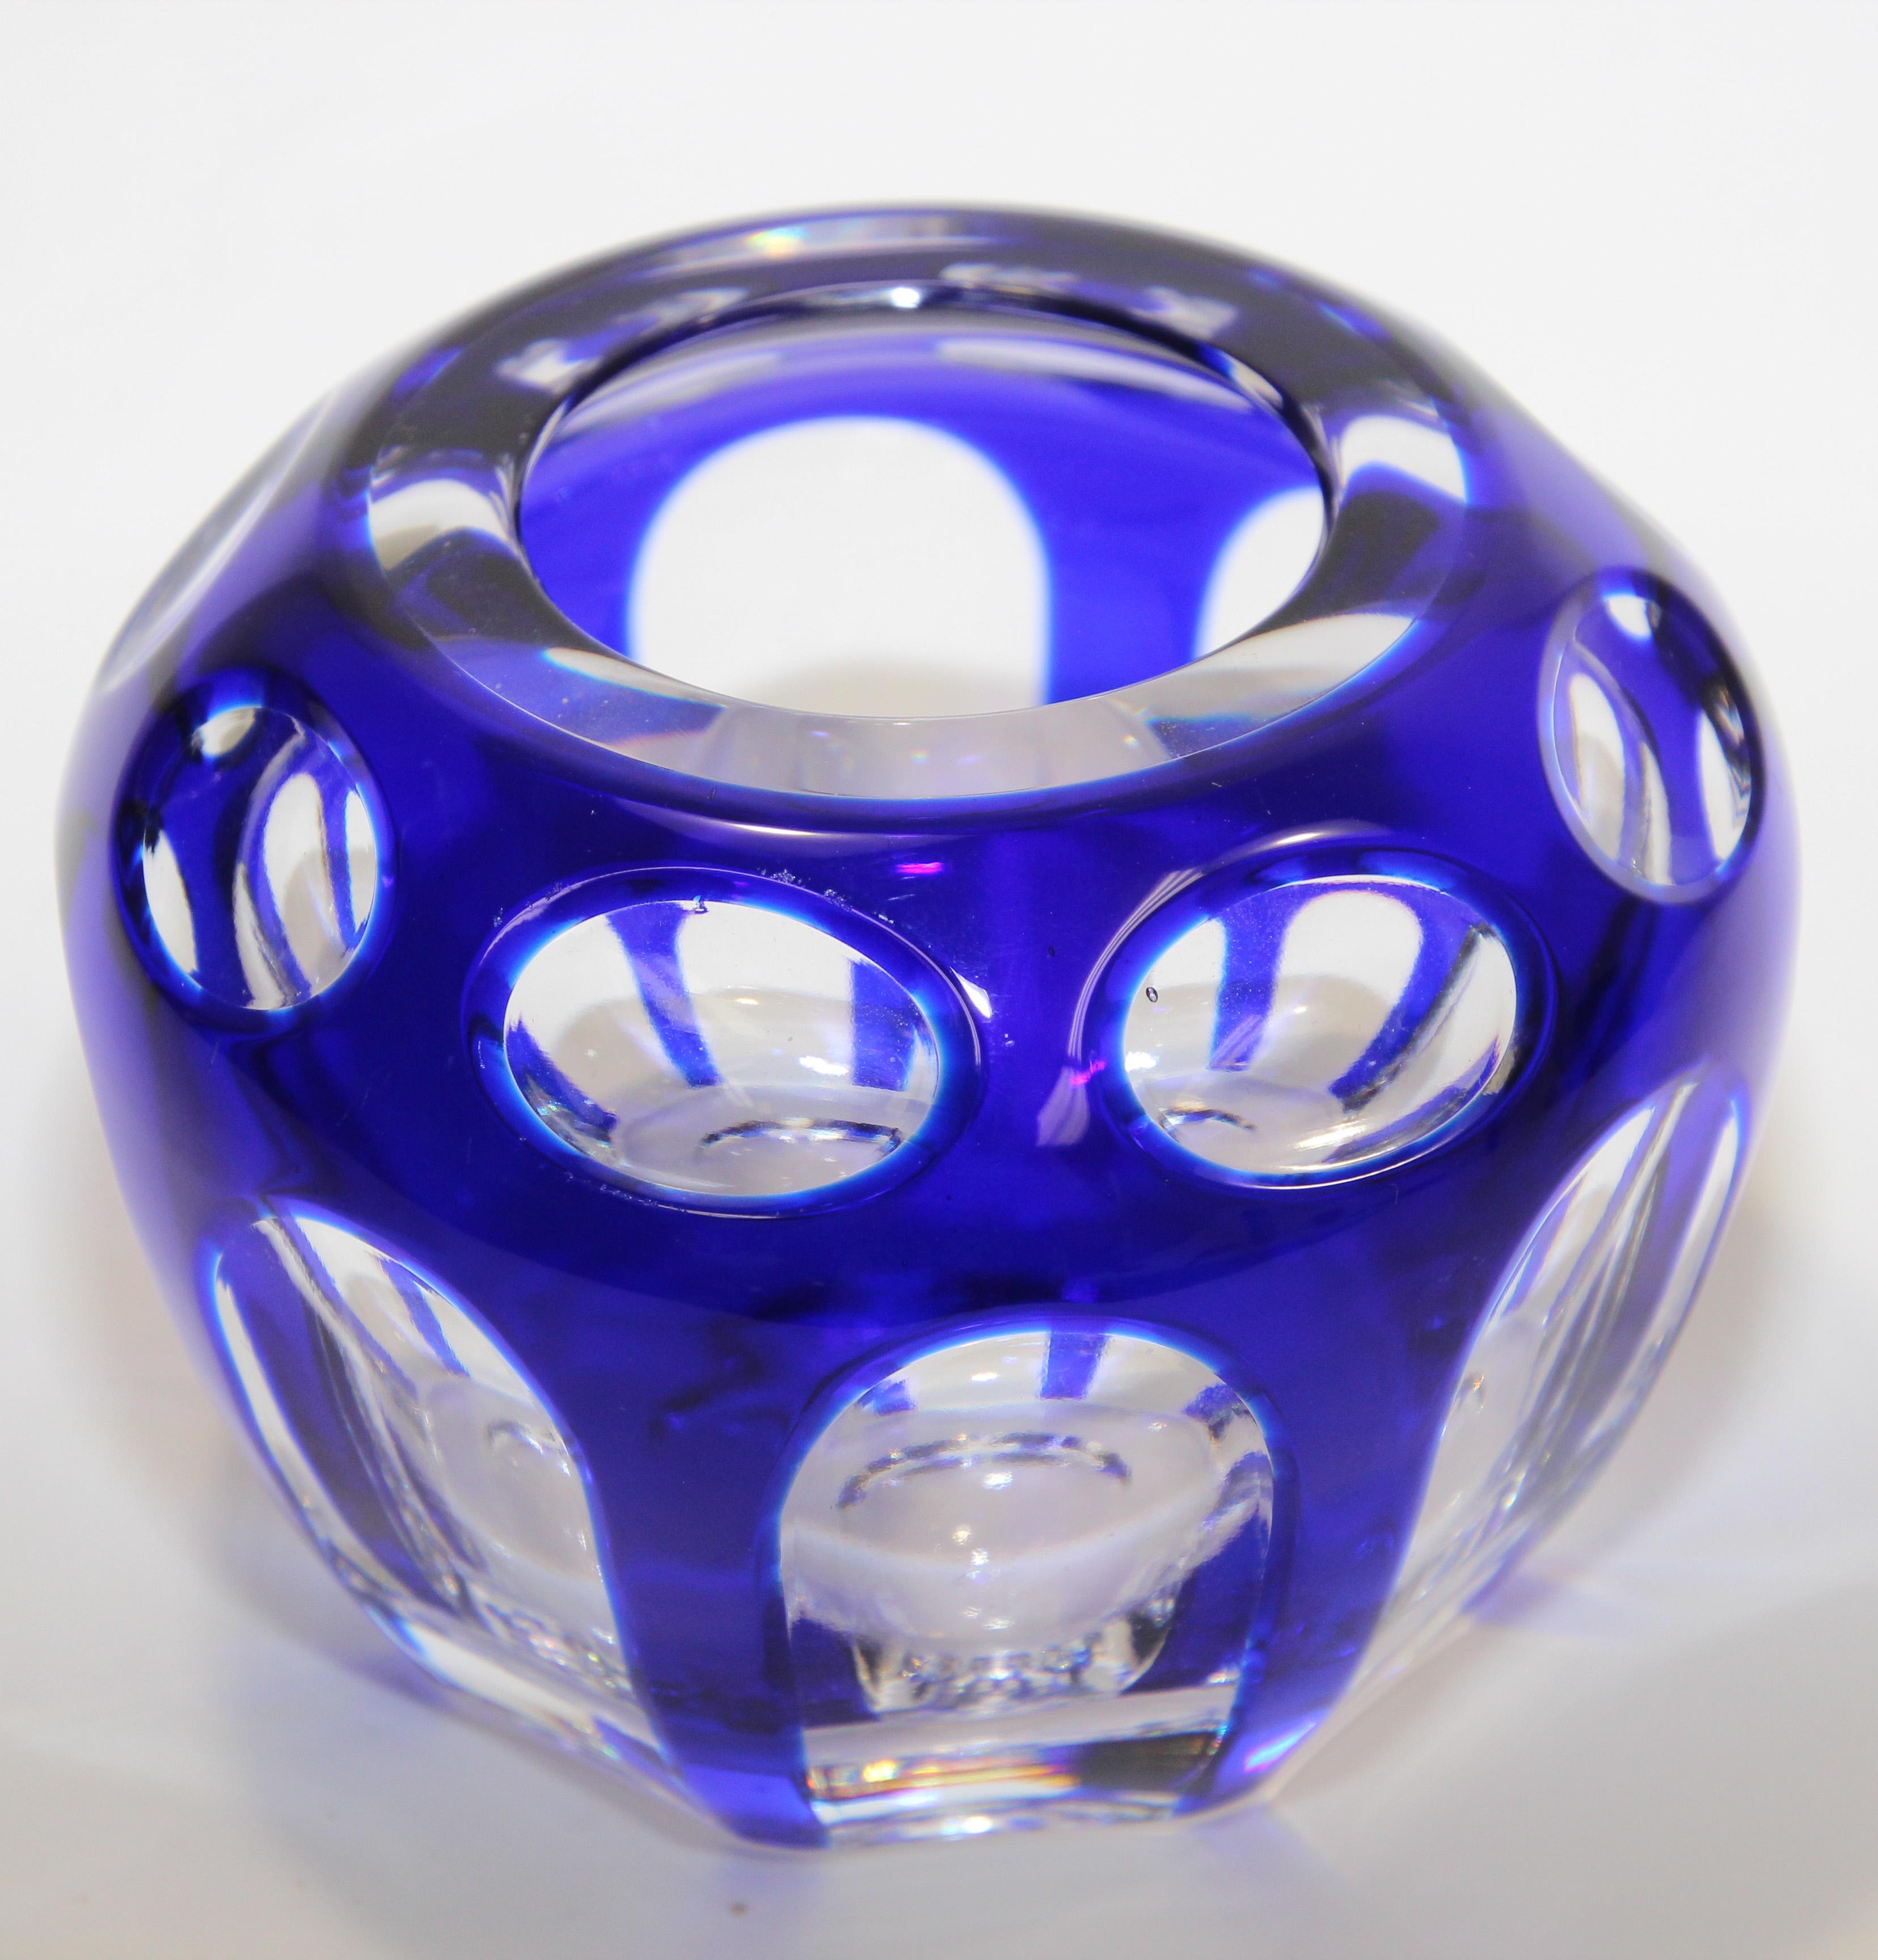 Vintage Bohemian cobalt blue cut to clear crystal votive candle holder
Crystal glass in excellent condition.
Great to use with votive candle or as a decorative glass bowl or paper weight.
Bohemian Czech art glass heavy with post modern circular